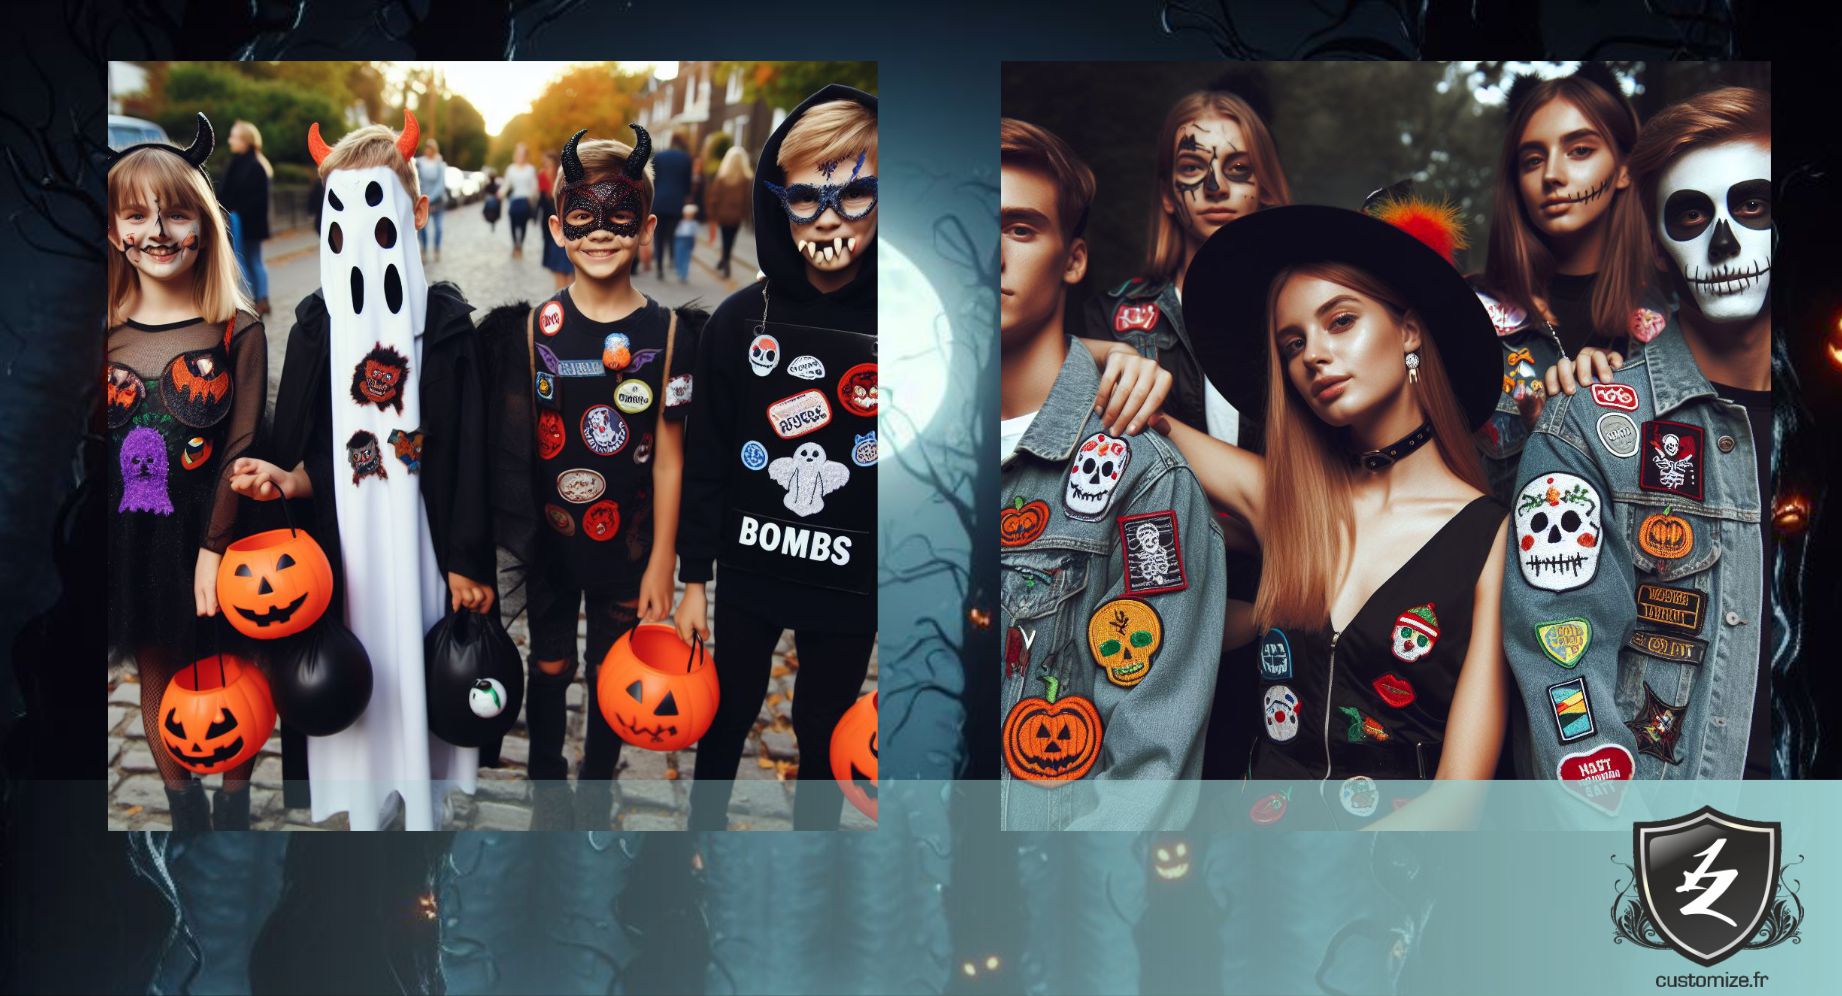 Halloween style by customize.fr